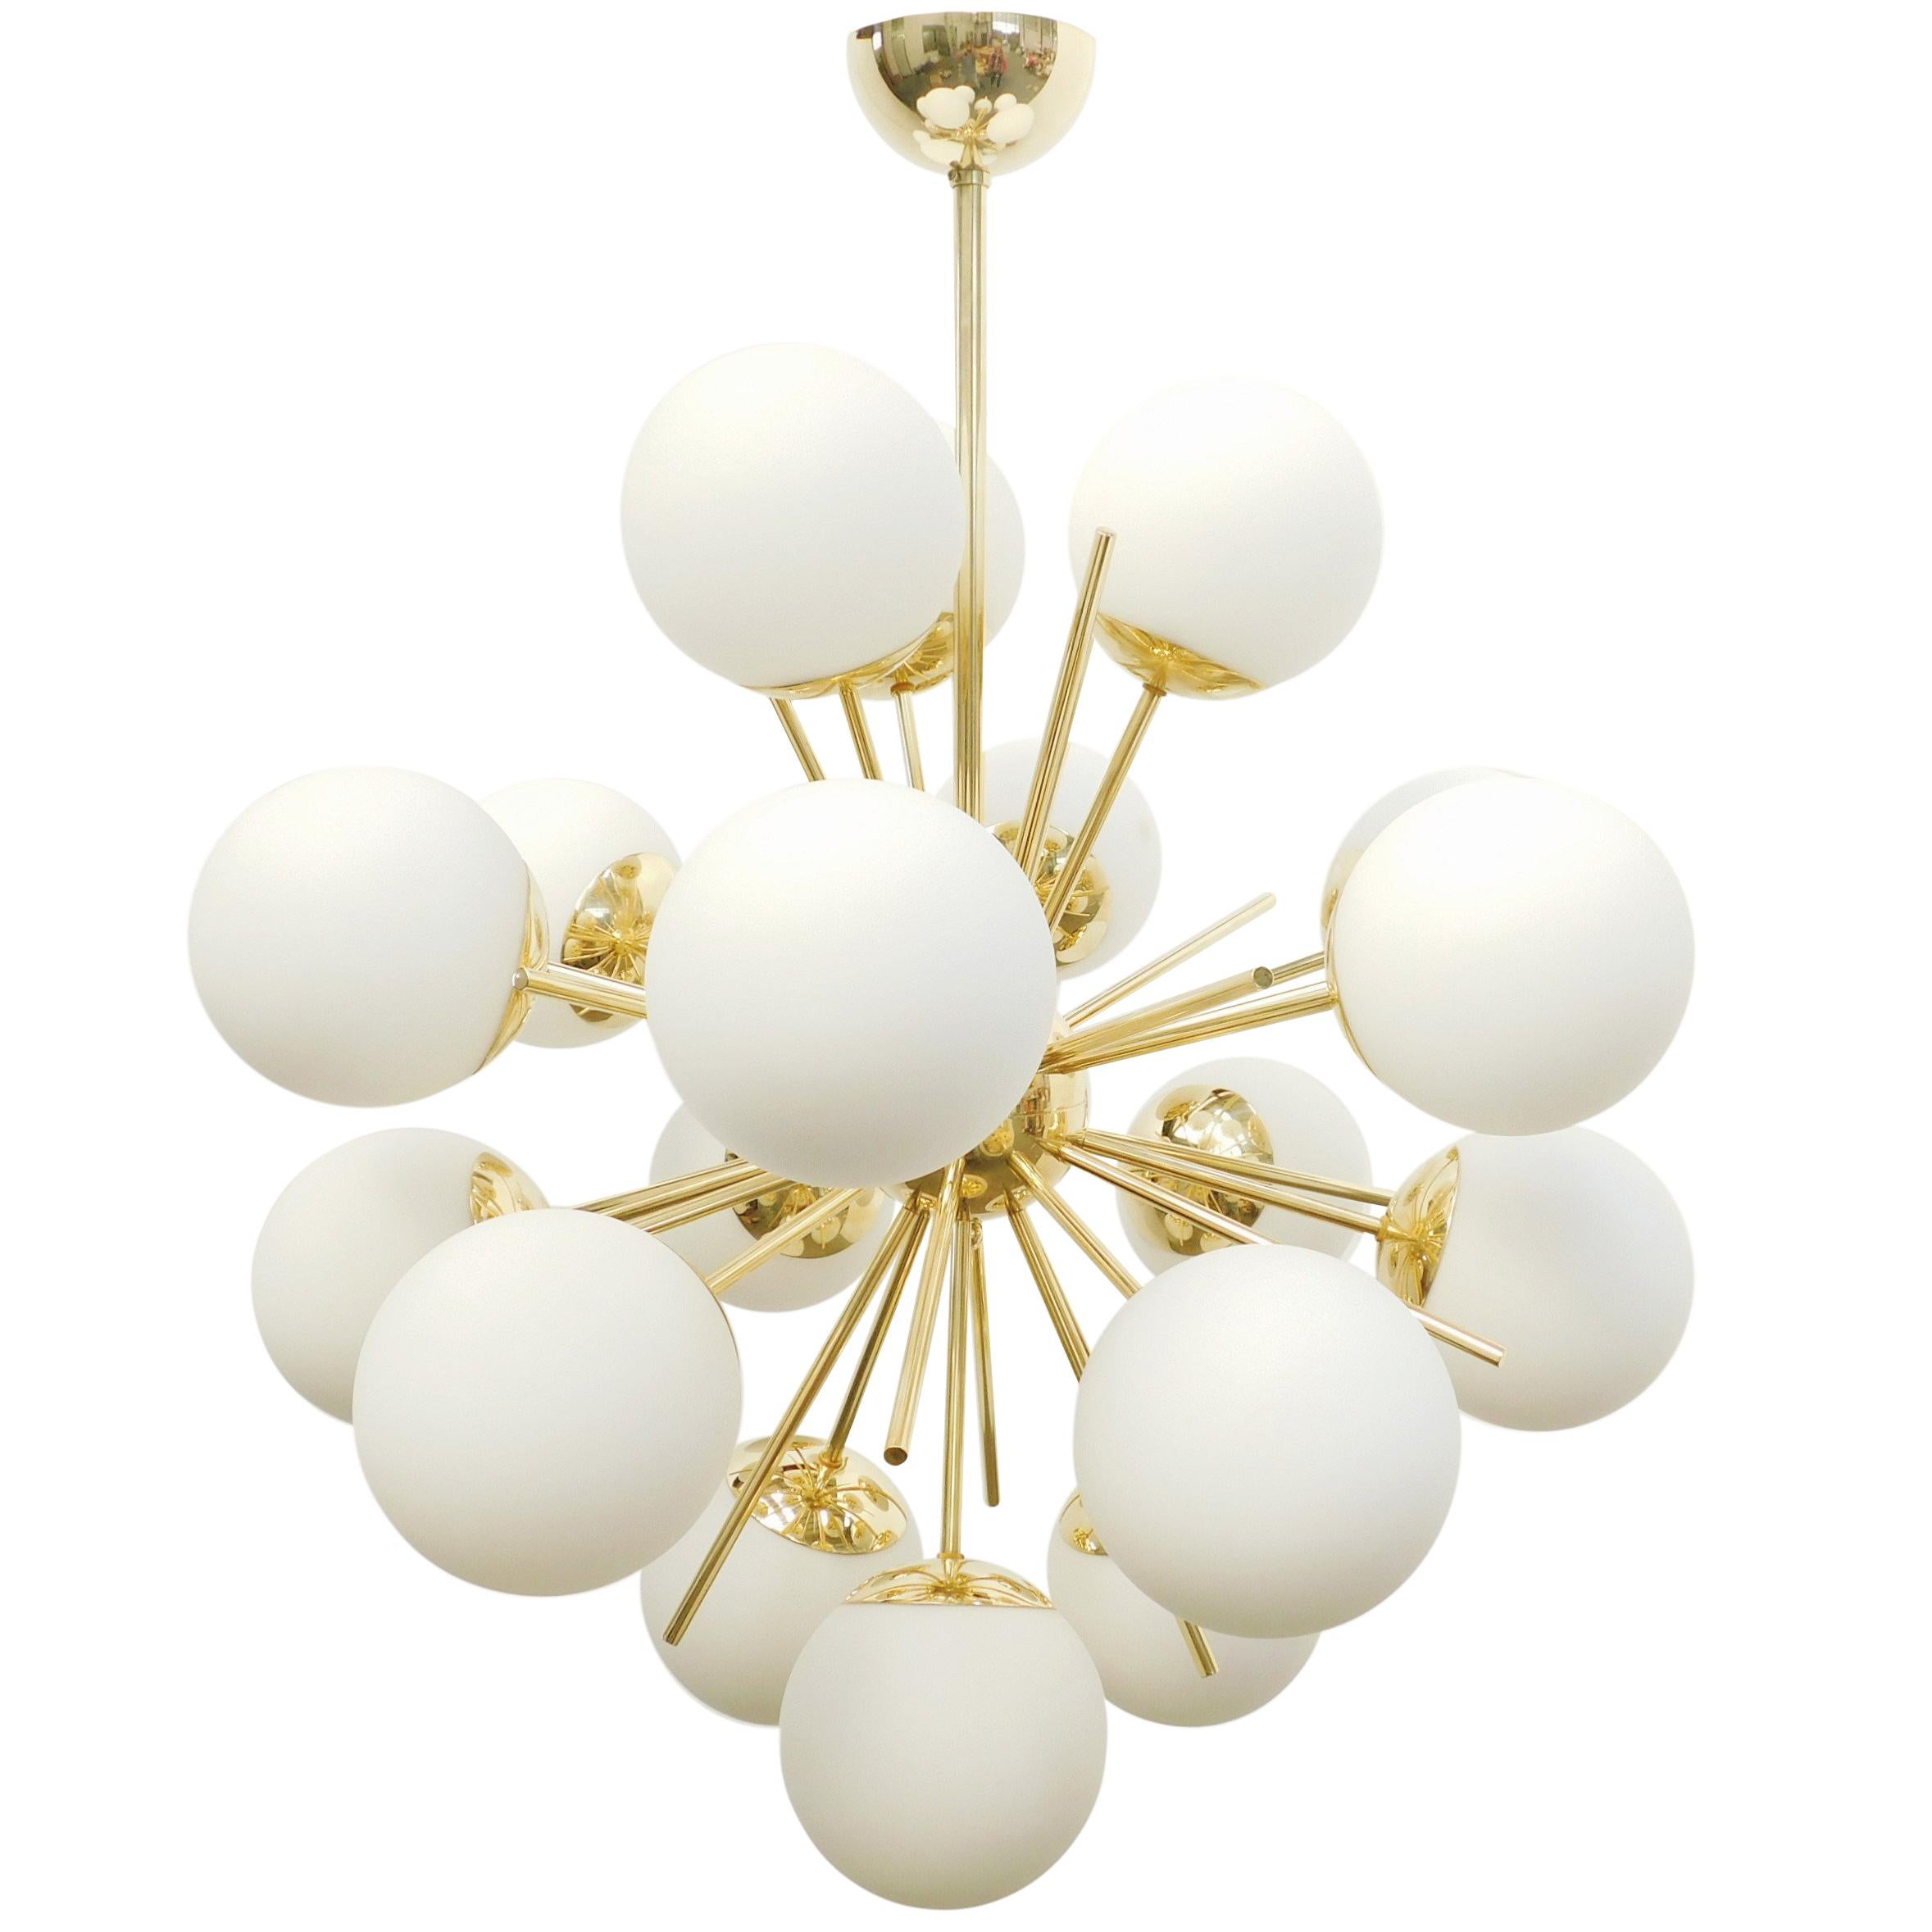 Italian sputnik chandelier with 18 Murano glass globes mounted on brass frame / Designed by Fabio Bergomi for Fabio Ltd / Made in Italy
18 lights / E12 or E14 type / max 40W each
Diameter: 29 inches / Height: 32 inches including rod and canopy
Order